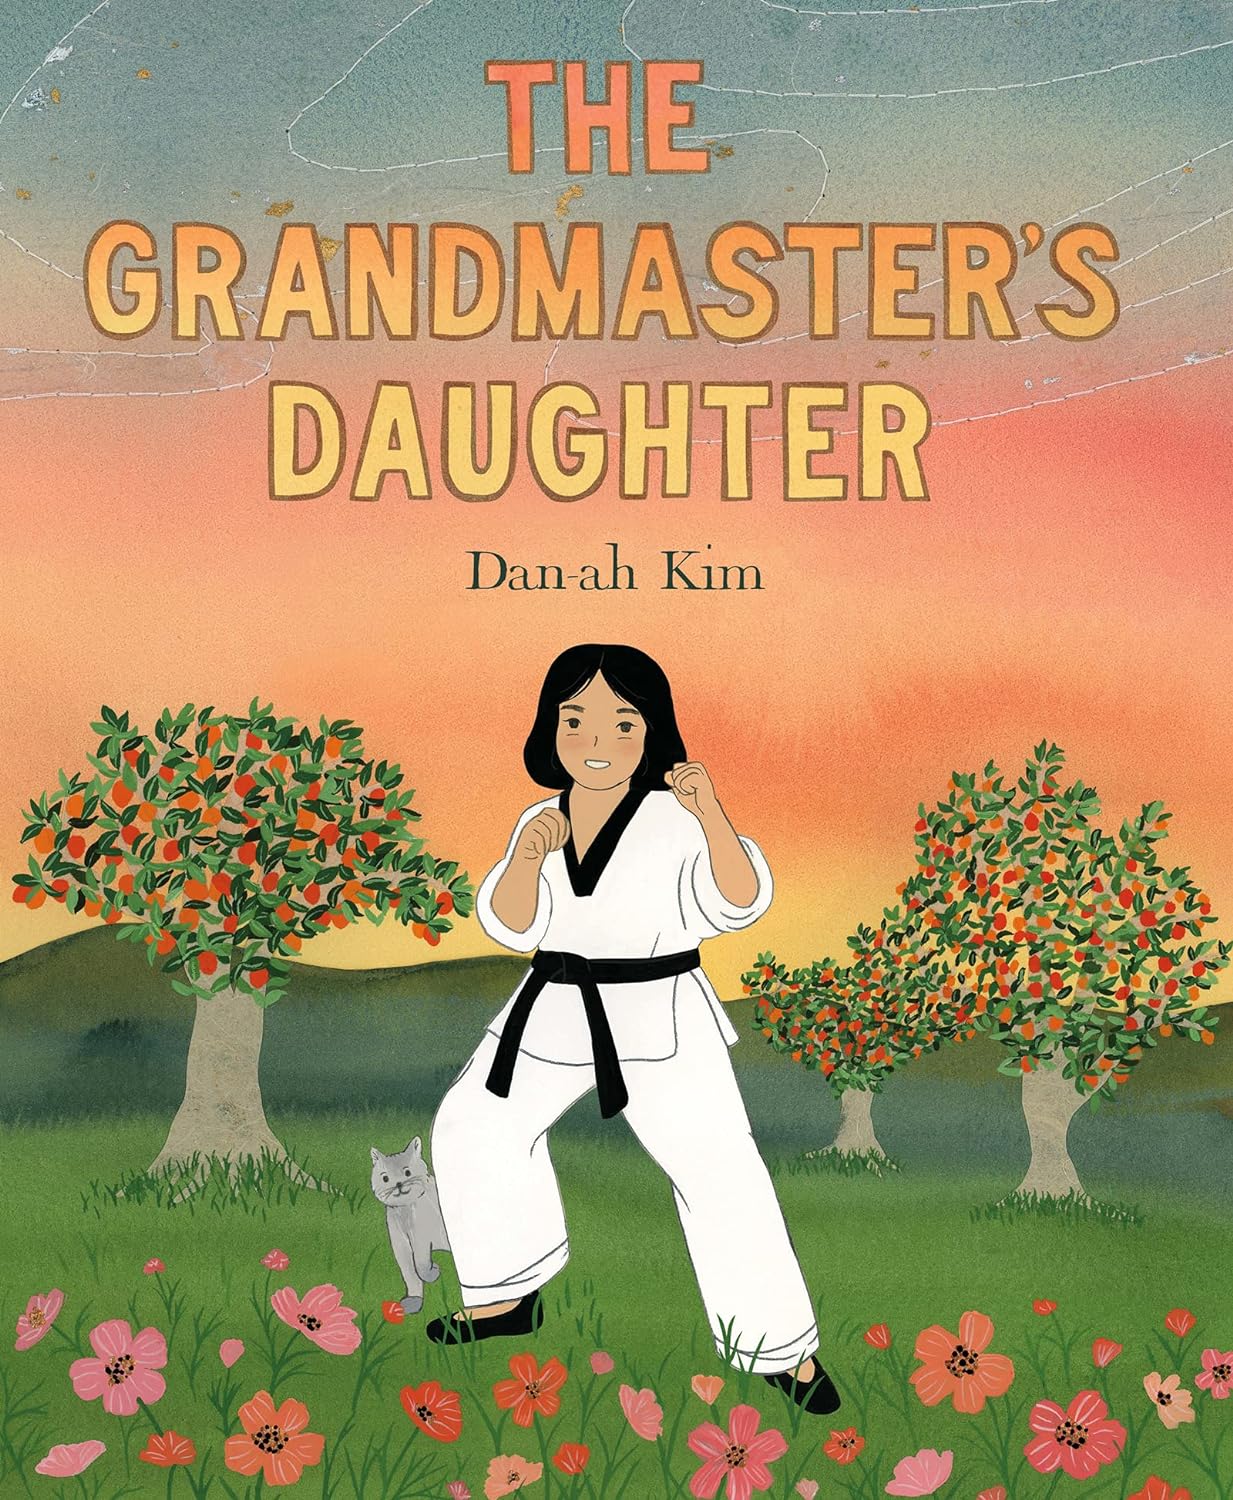 The Grandmaster's Daughter - book about taekwondo and family